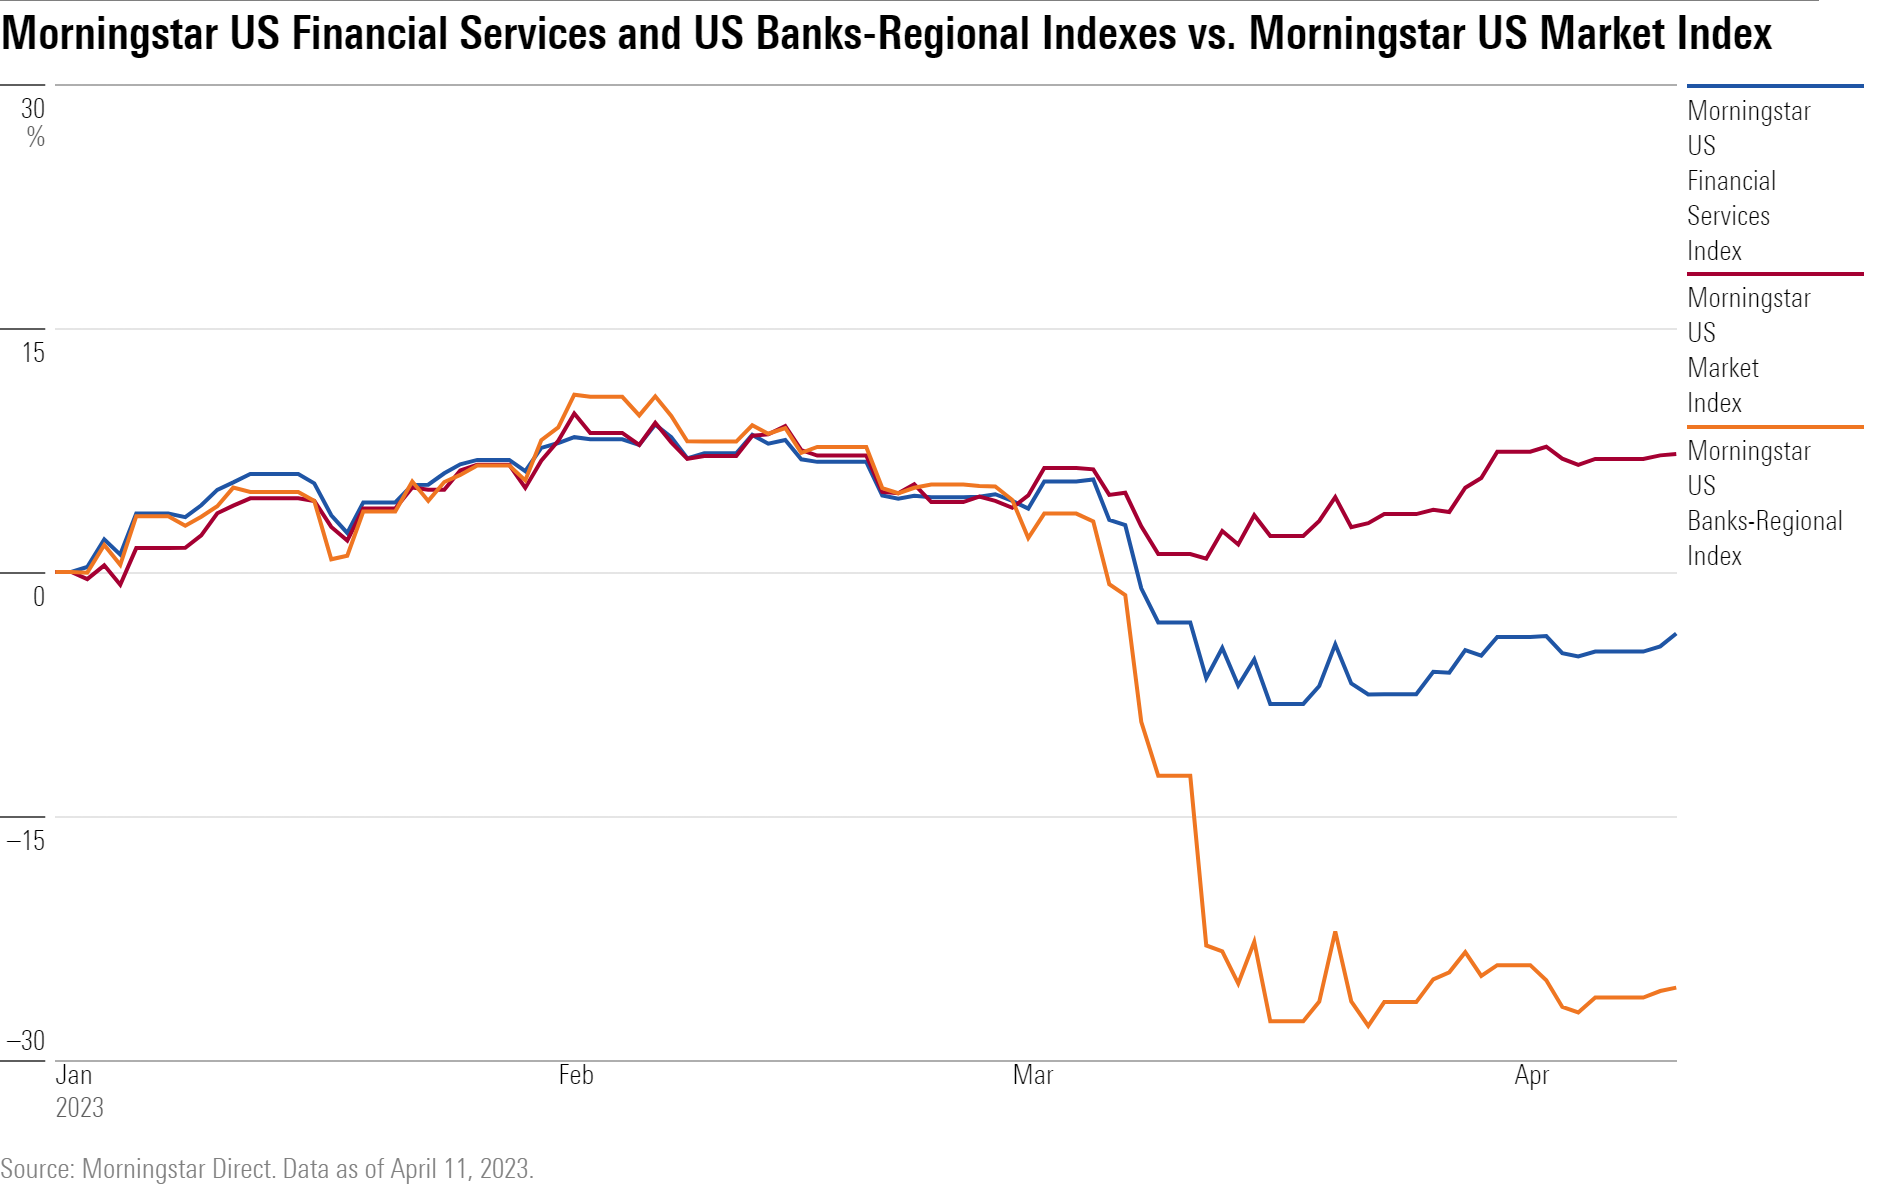 A line chart showing the performance of the Morningstar US Financial Services and US Banks-Regional Indexes compared with the Morningstar US Market Index